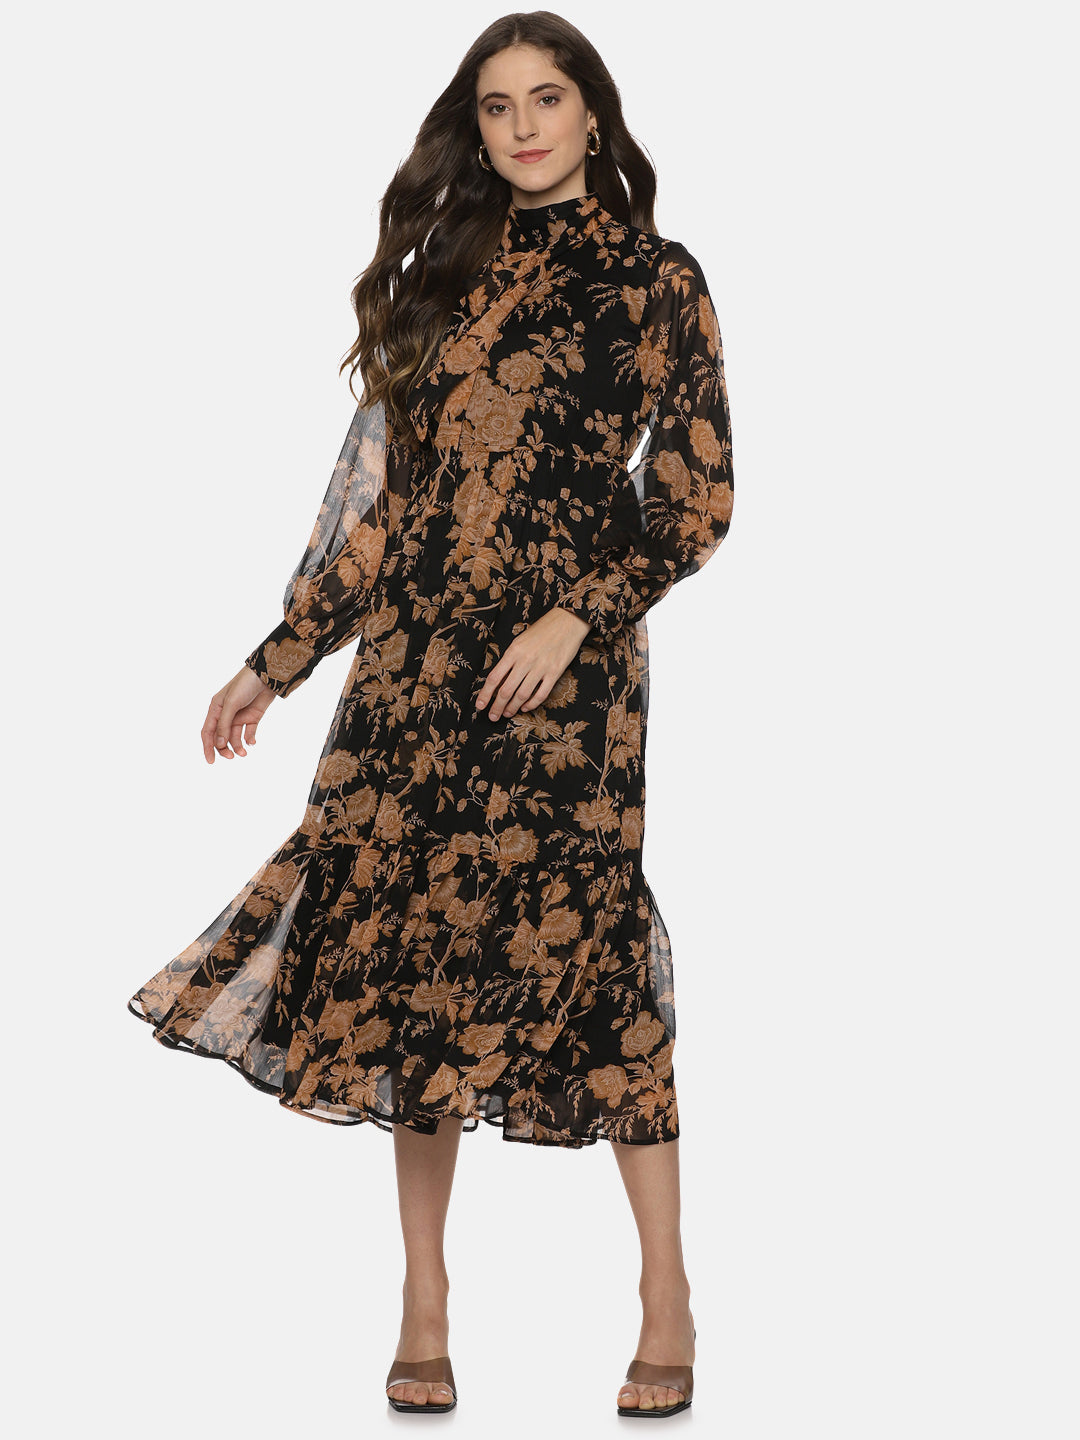 Buy Black Printed Floral Chiffon Fabric | Front Tie Knot Midaxi Dress Online In India